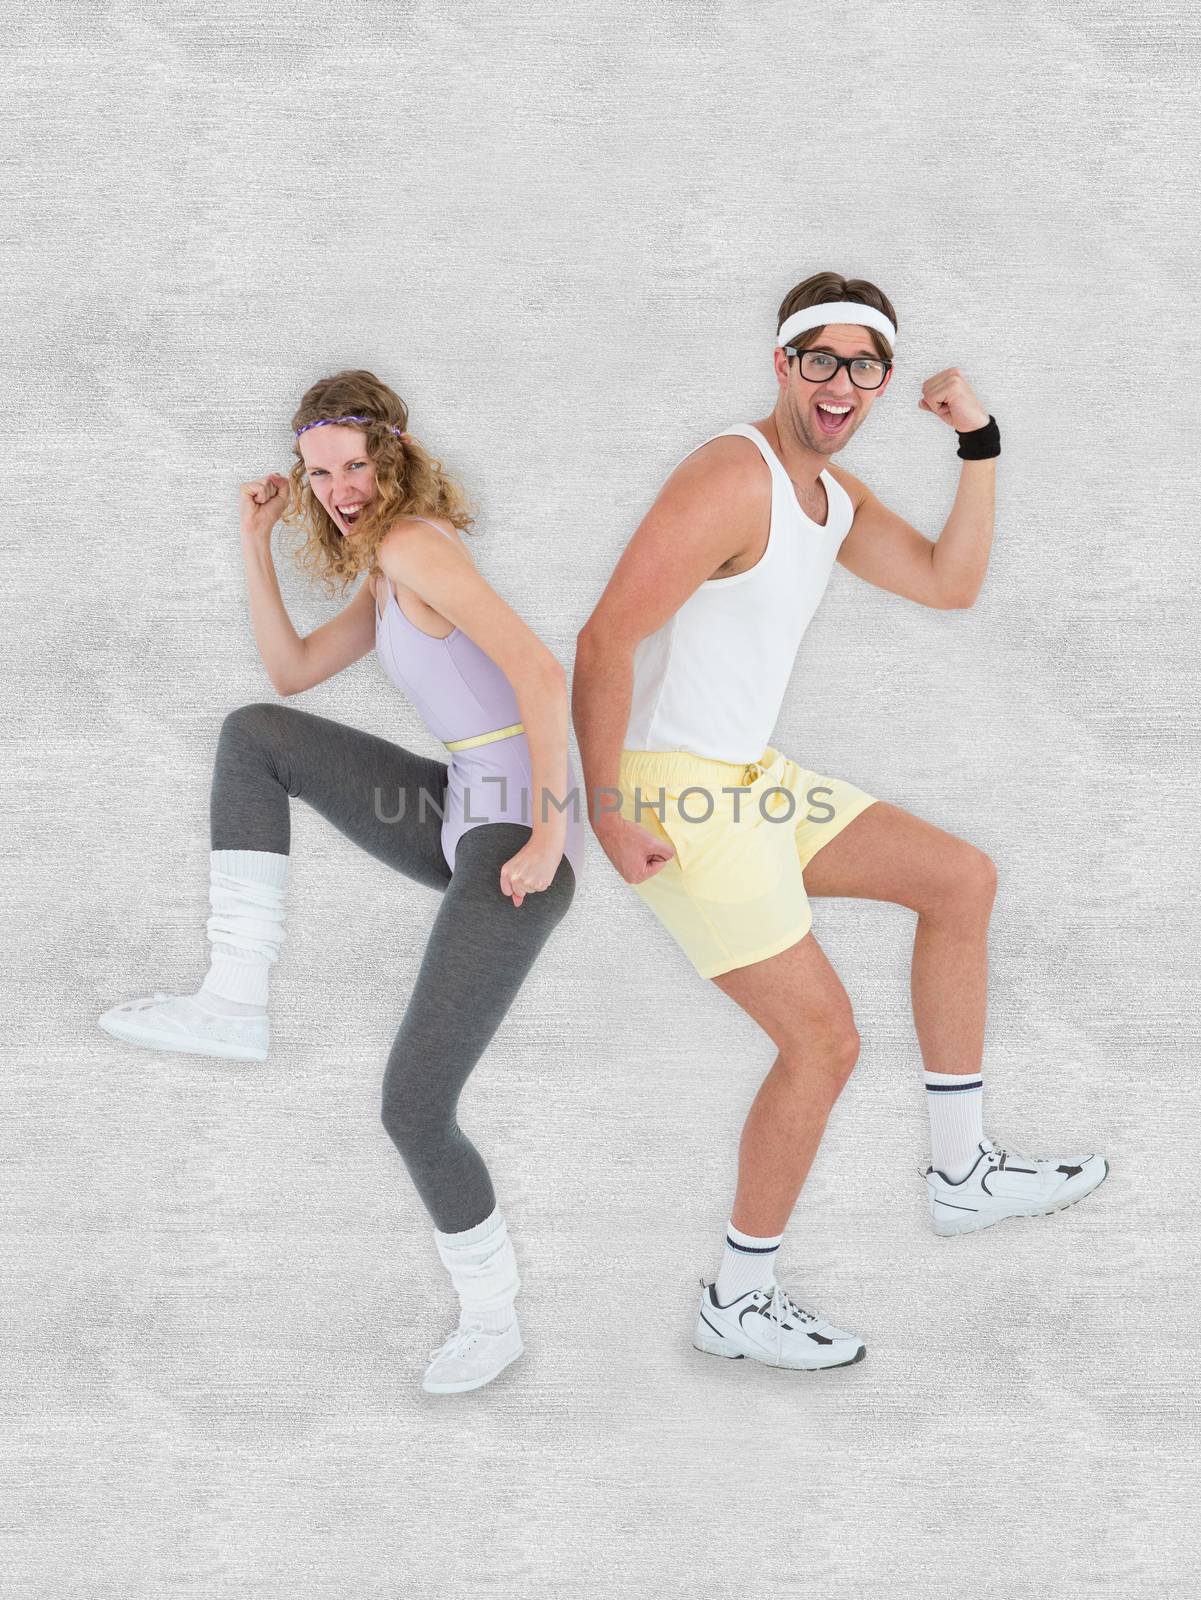 Geeky hipster couple posing in sportswear against white background